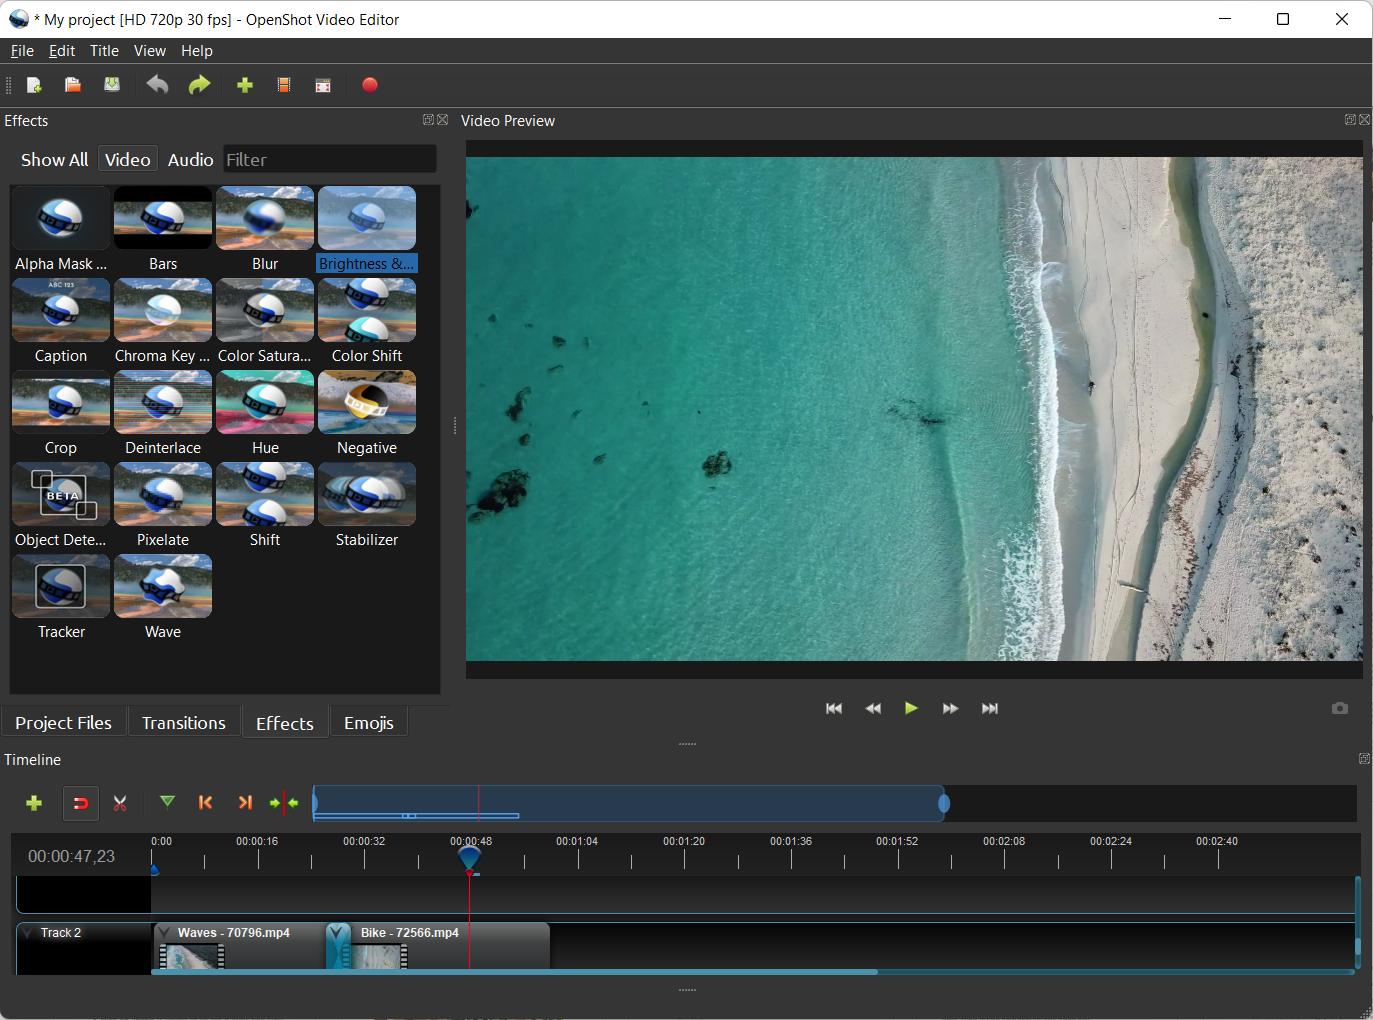 Video editor for PC free download, OpenShot